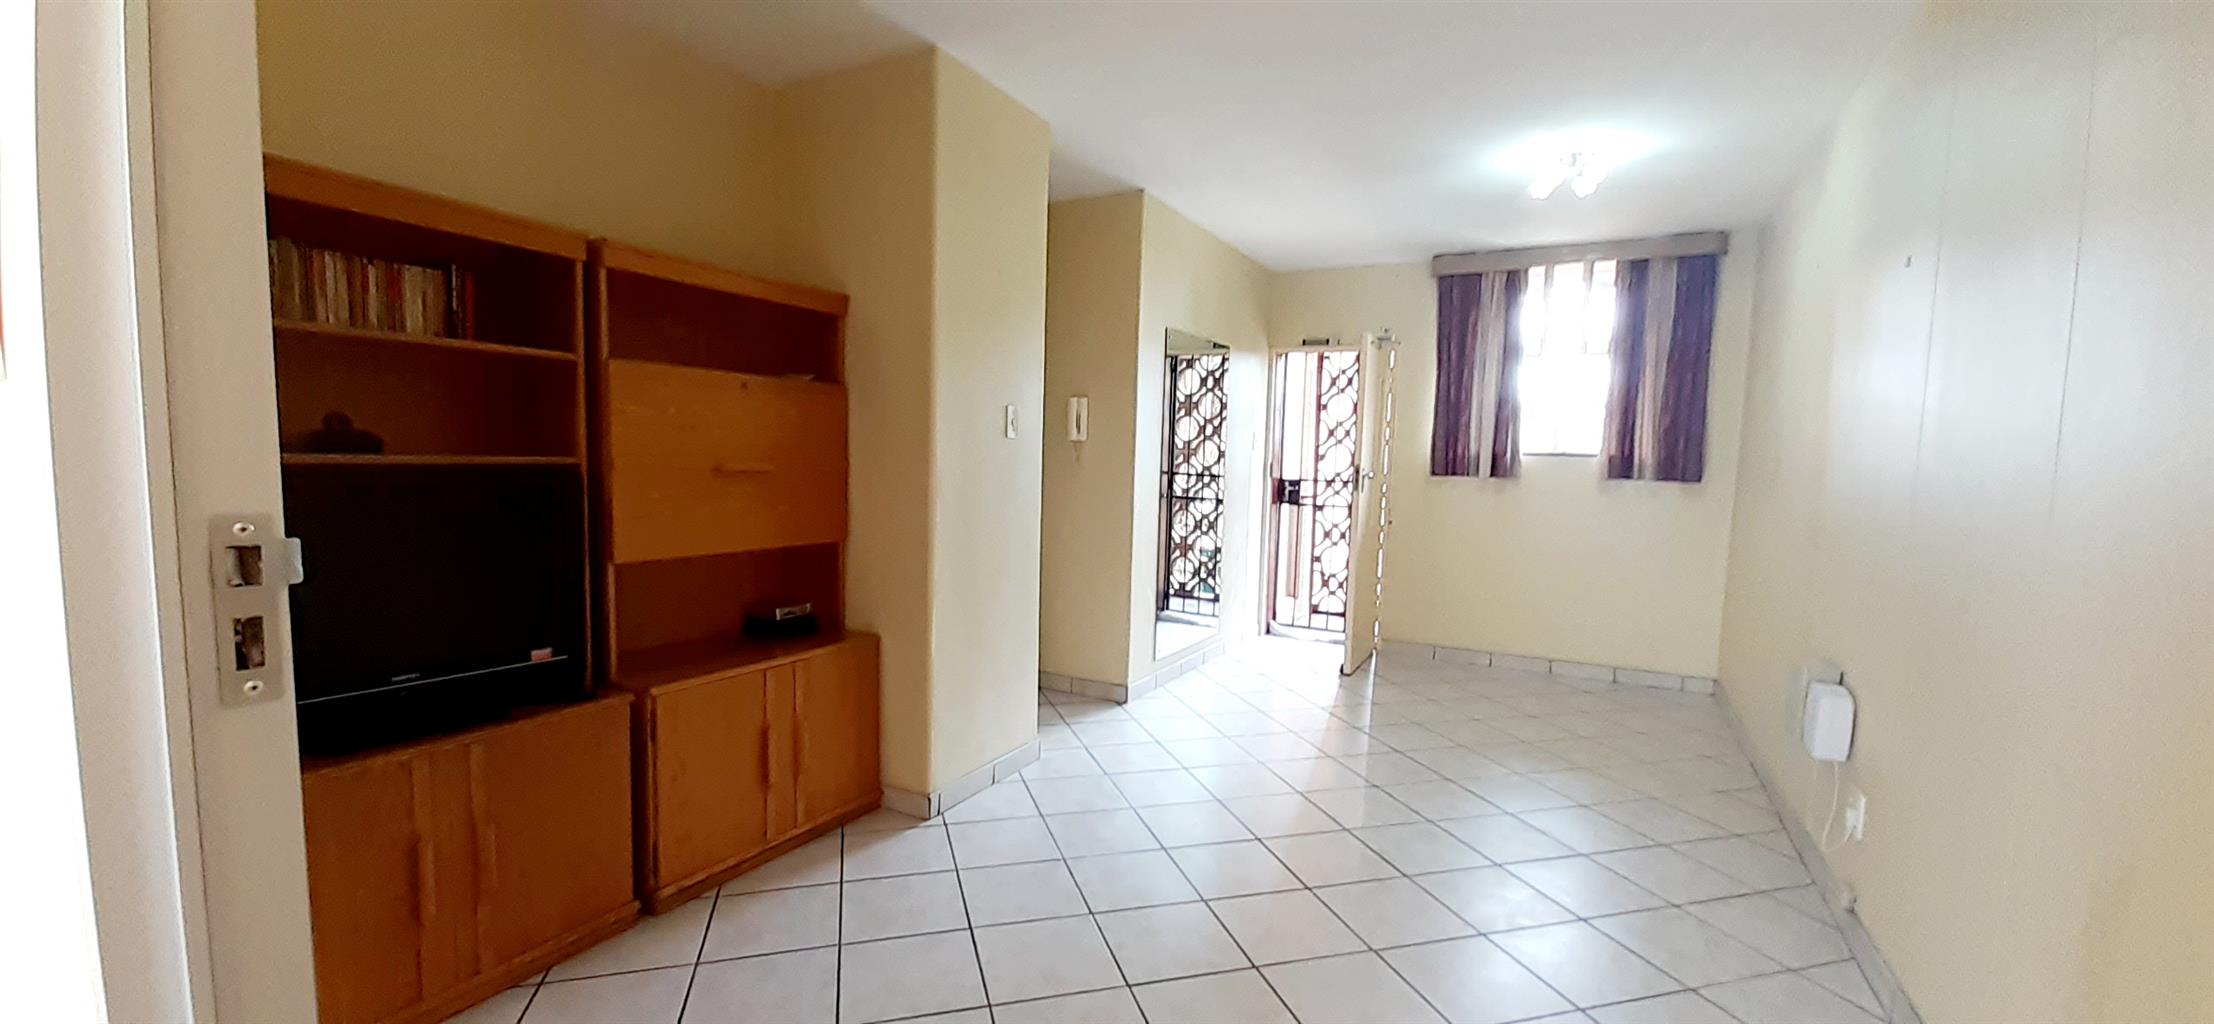 A 2.5 bedroom flat for rent in Arcadia, Pretoria near amenities and colleges